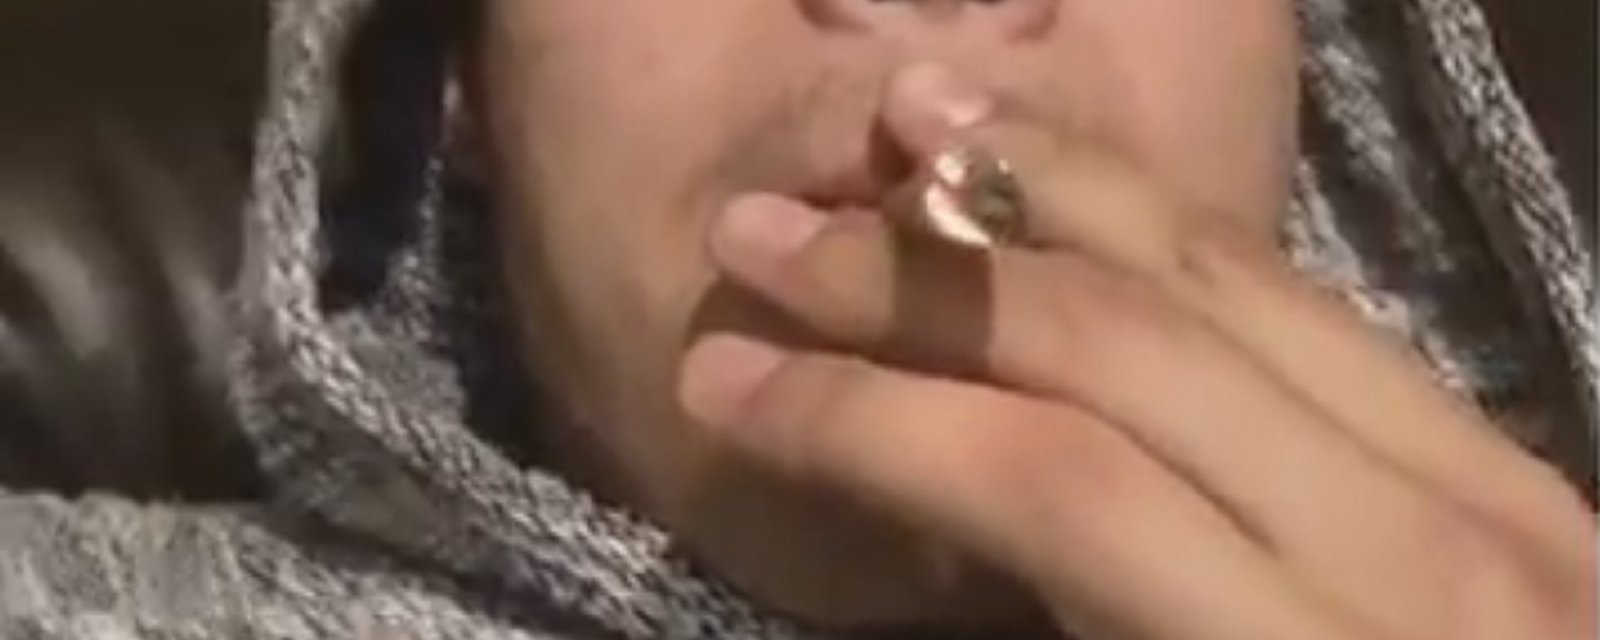 FAIL: NHL prospect puts video of himself smoking a blunt online.